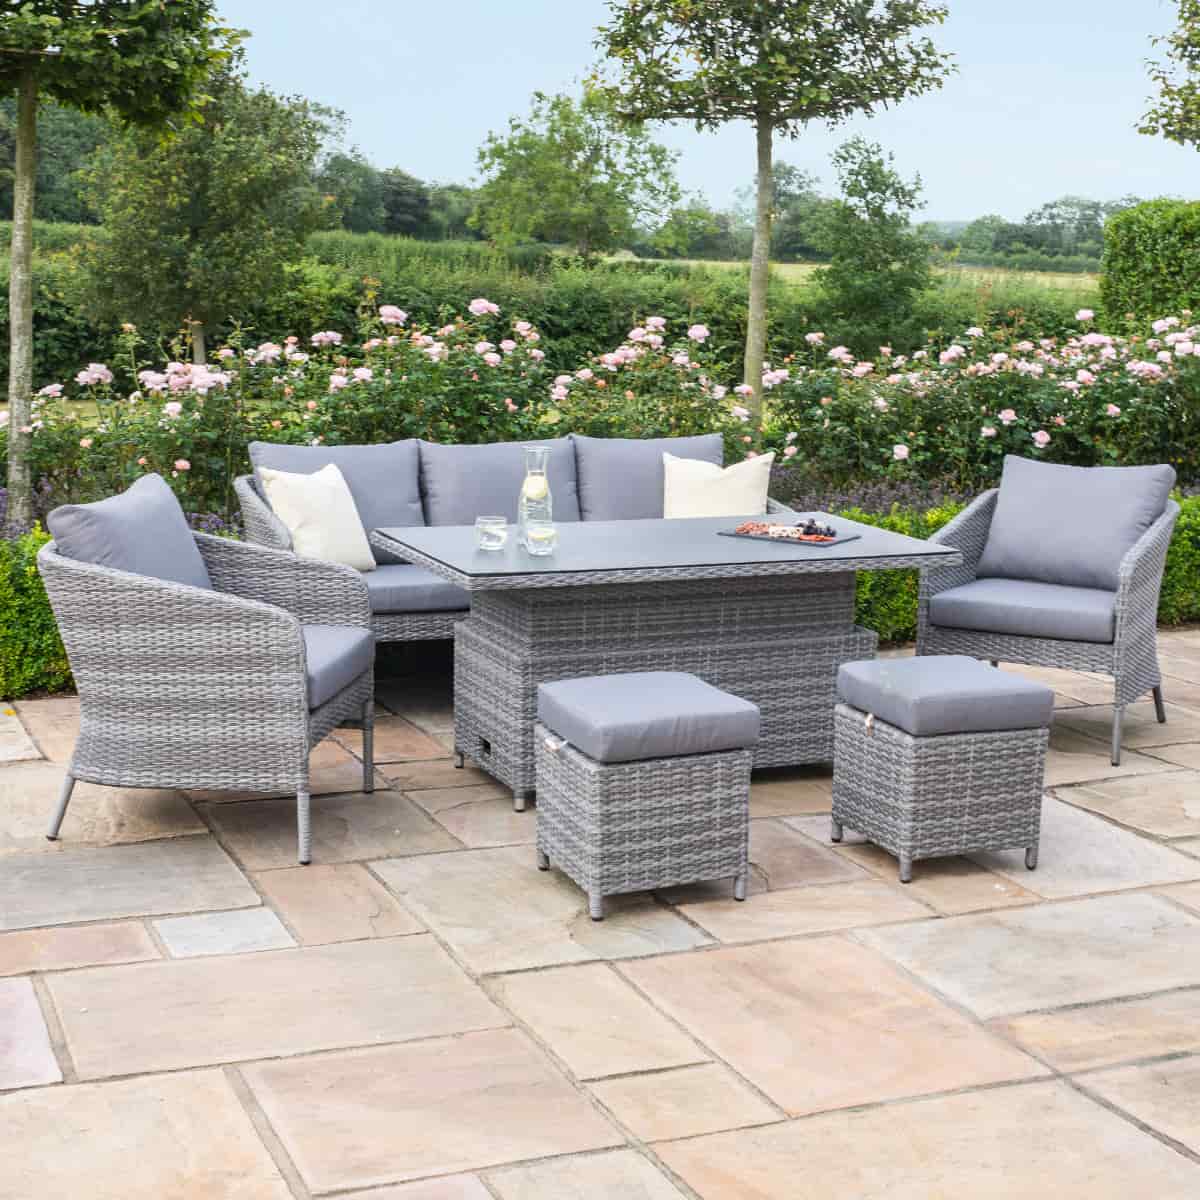 Grey rattan casual sofa dining set with rectangular rising table, two chairs and two stools